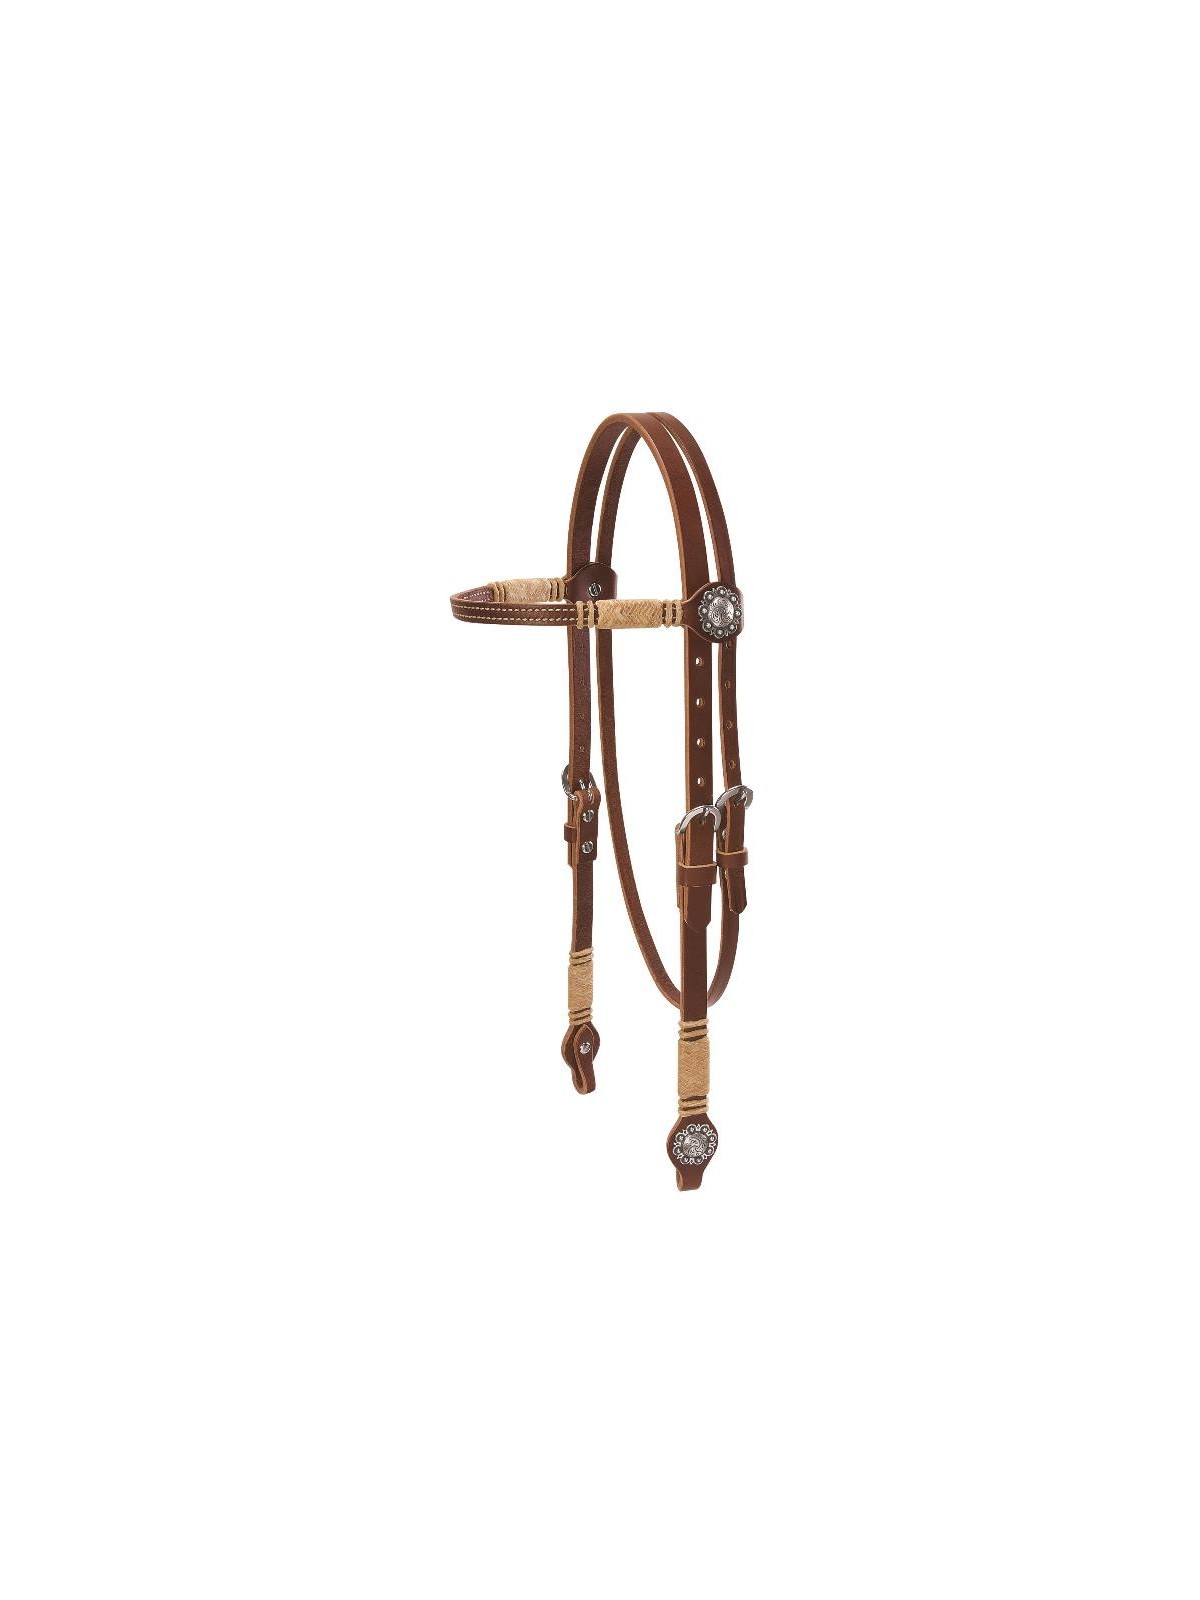 Western headstall with browband, conchos and rawhide accents